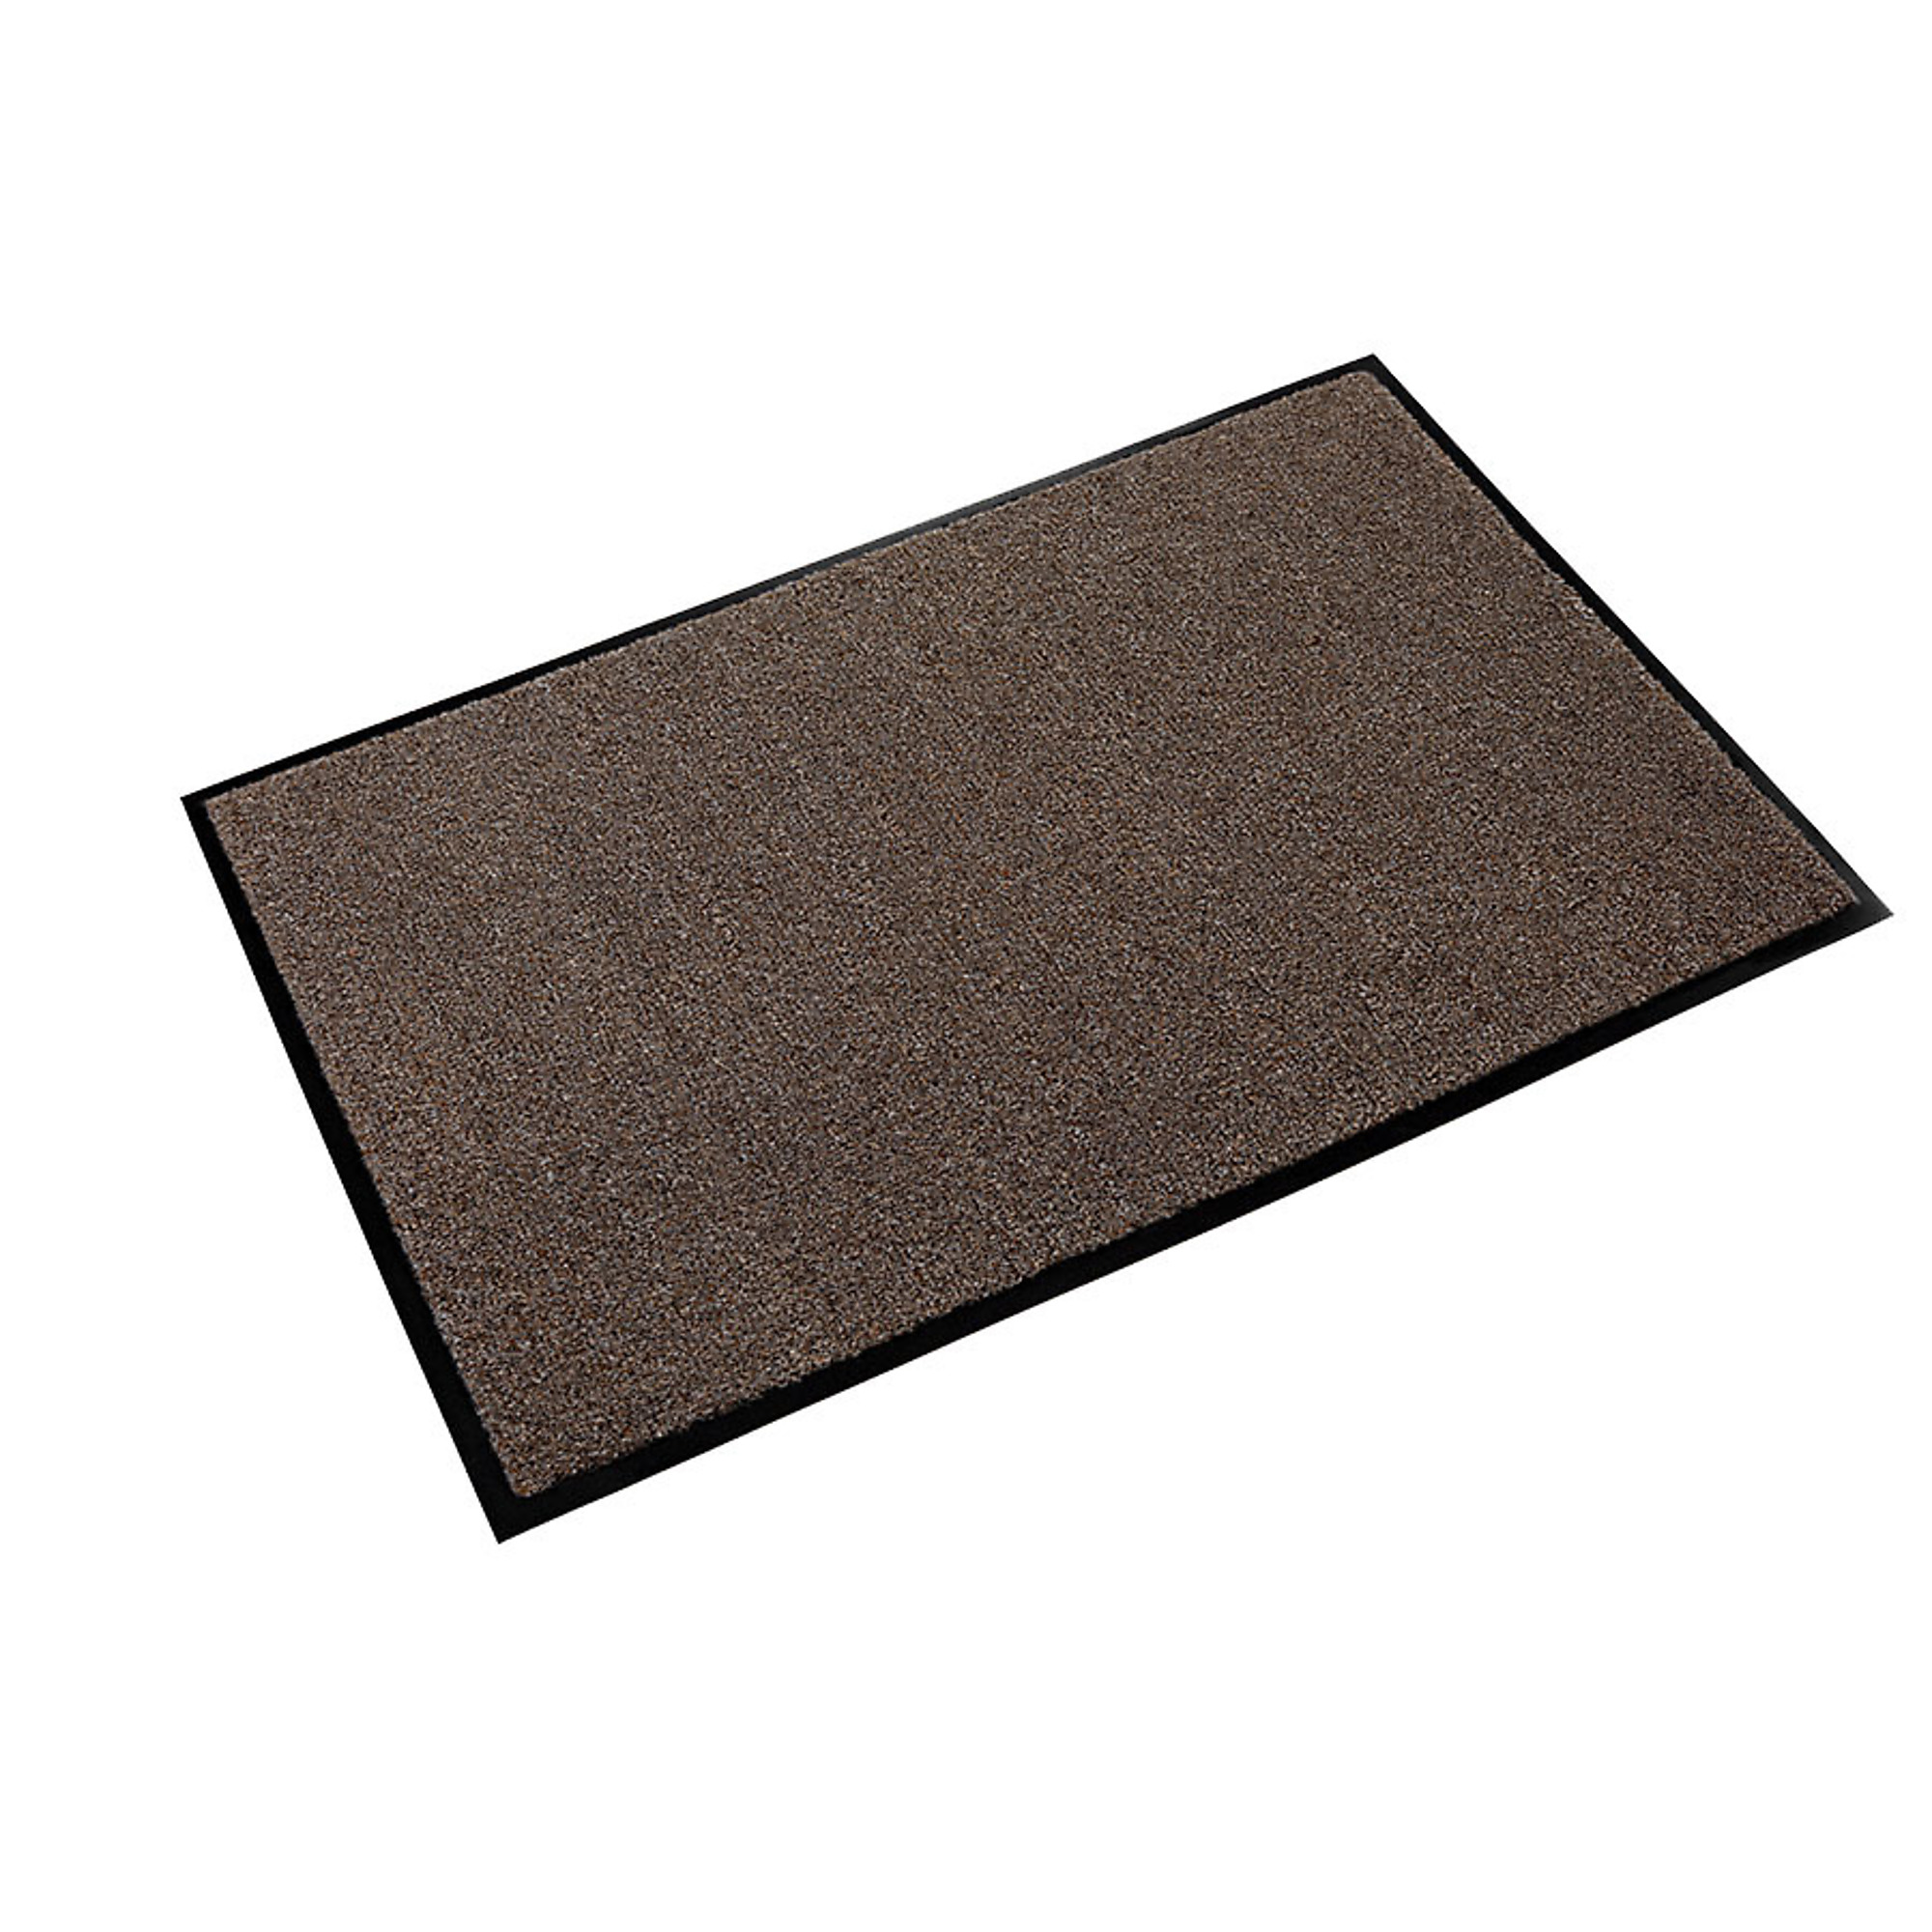 Crown Matting Technologies, Rely-On Olefin 4ft.x10ft. Walnut, Width 48 in, Length 120 in, Thickness 3/8 in, Model GS 0410WA